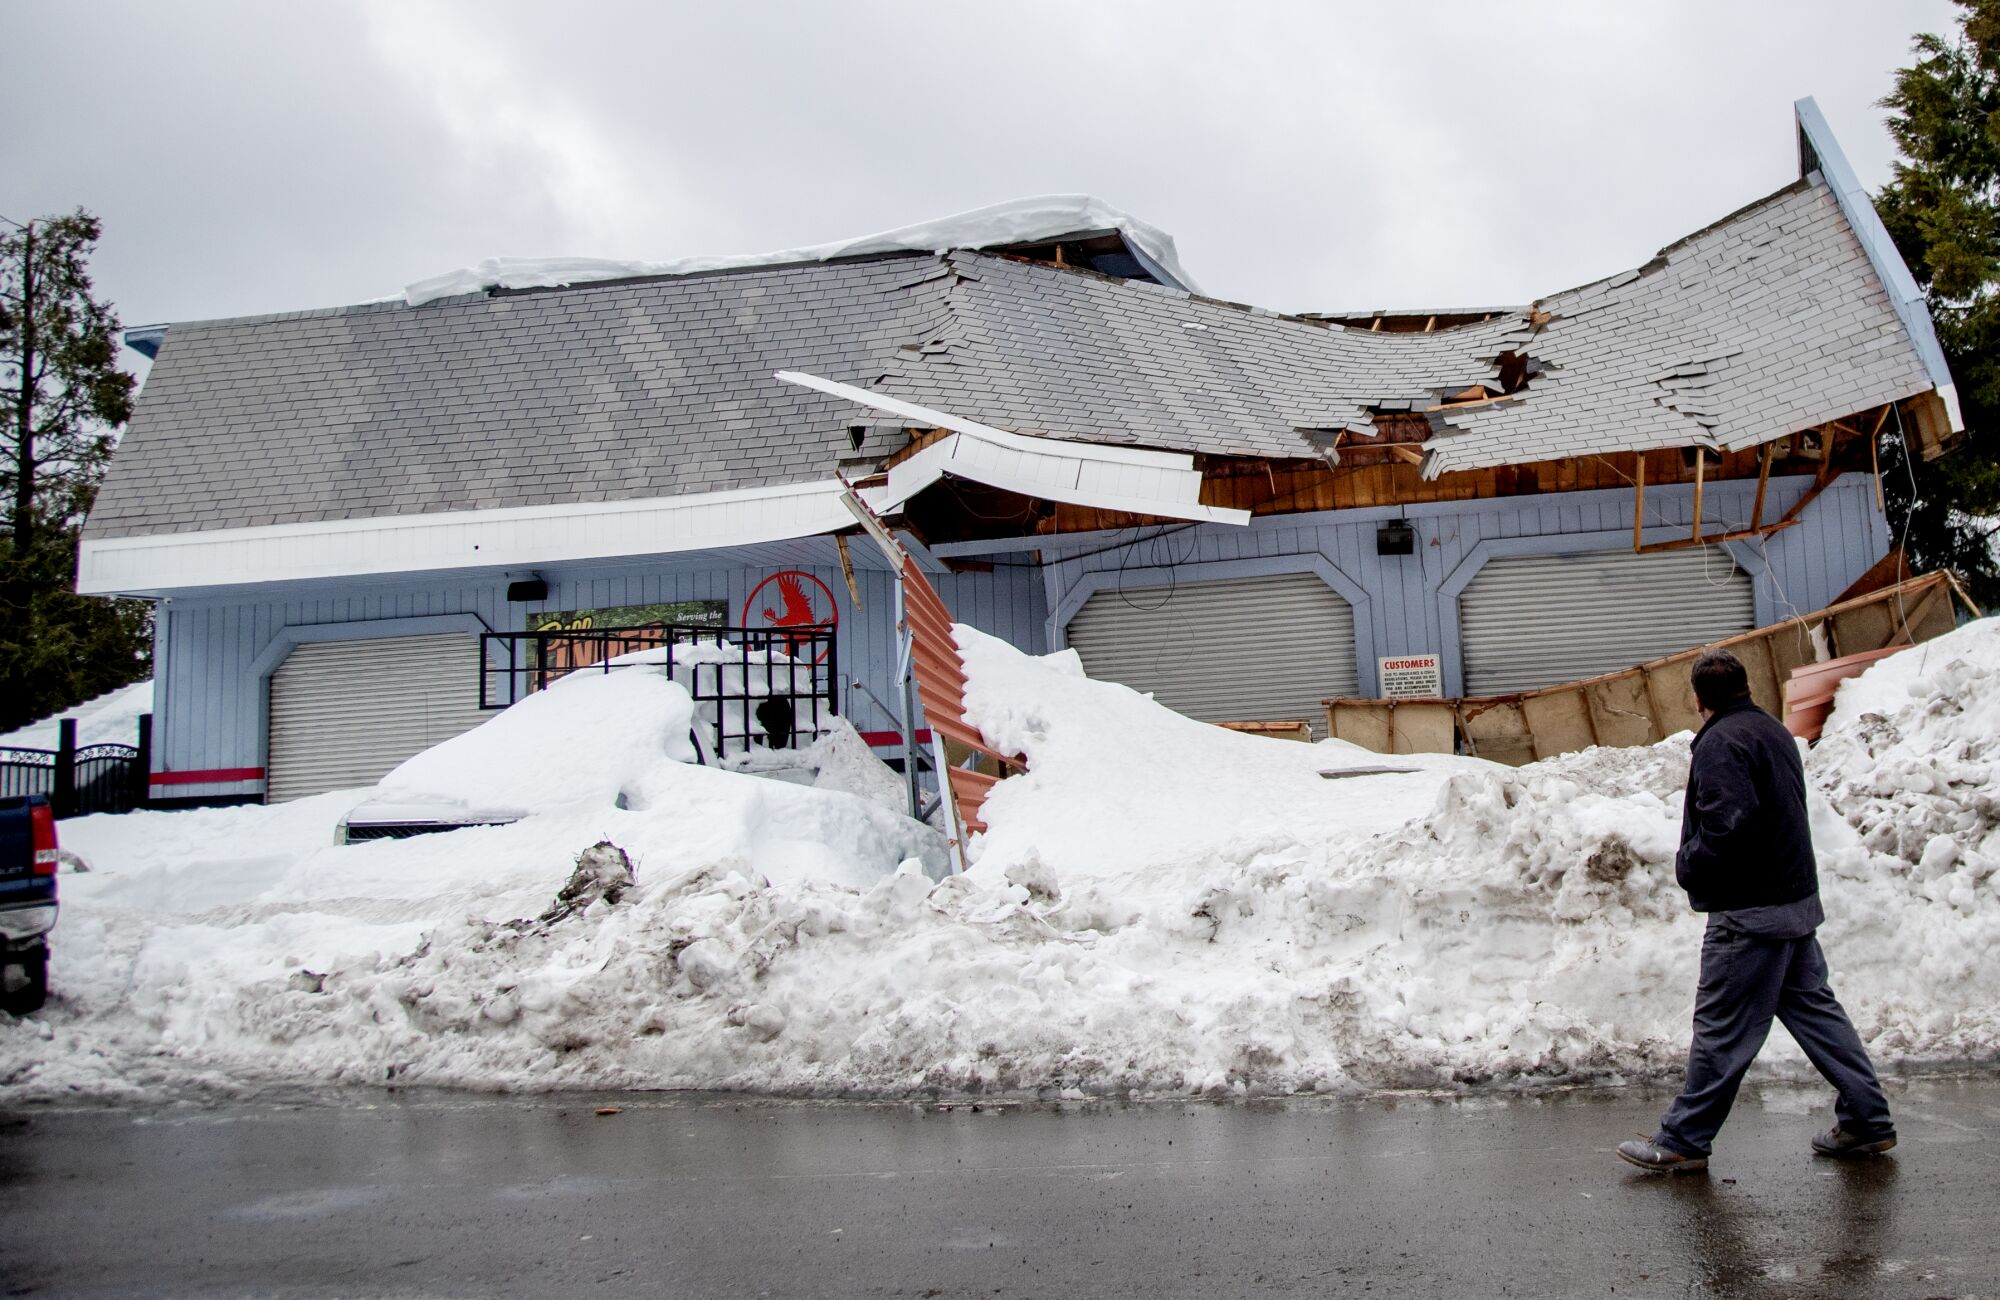 A roof has collapsed in Crestline.